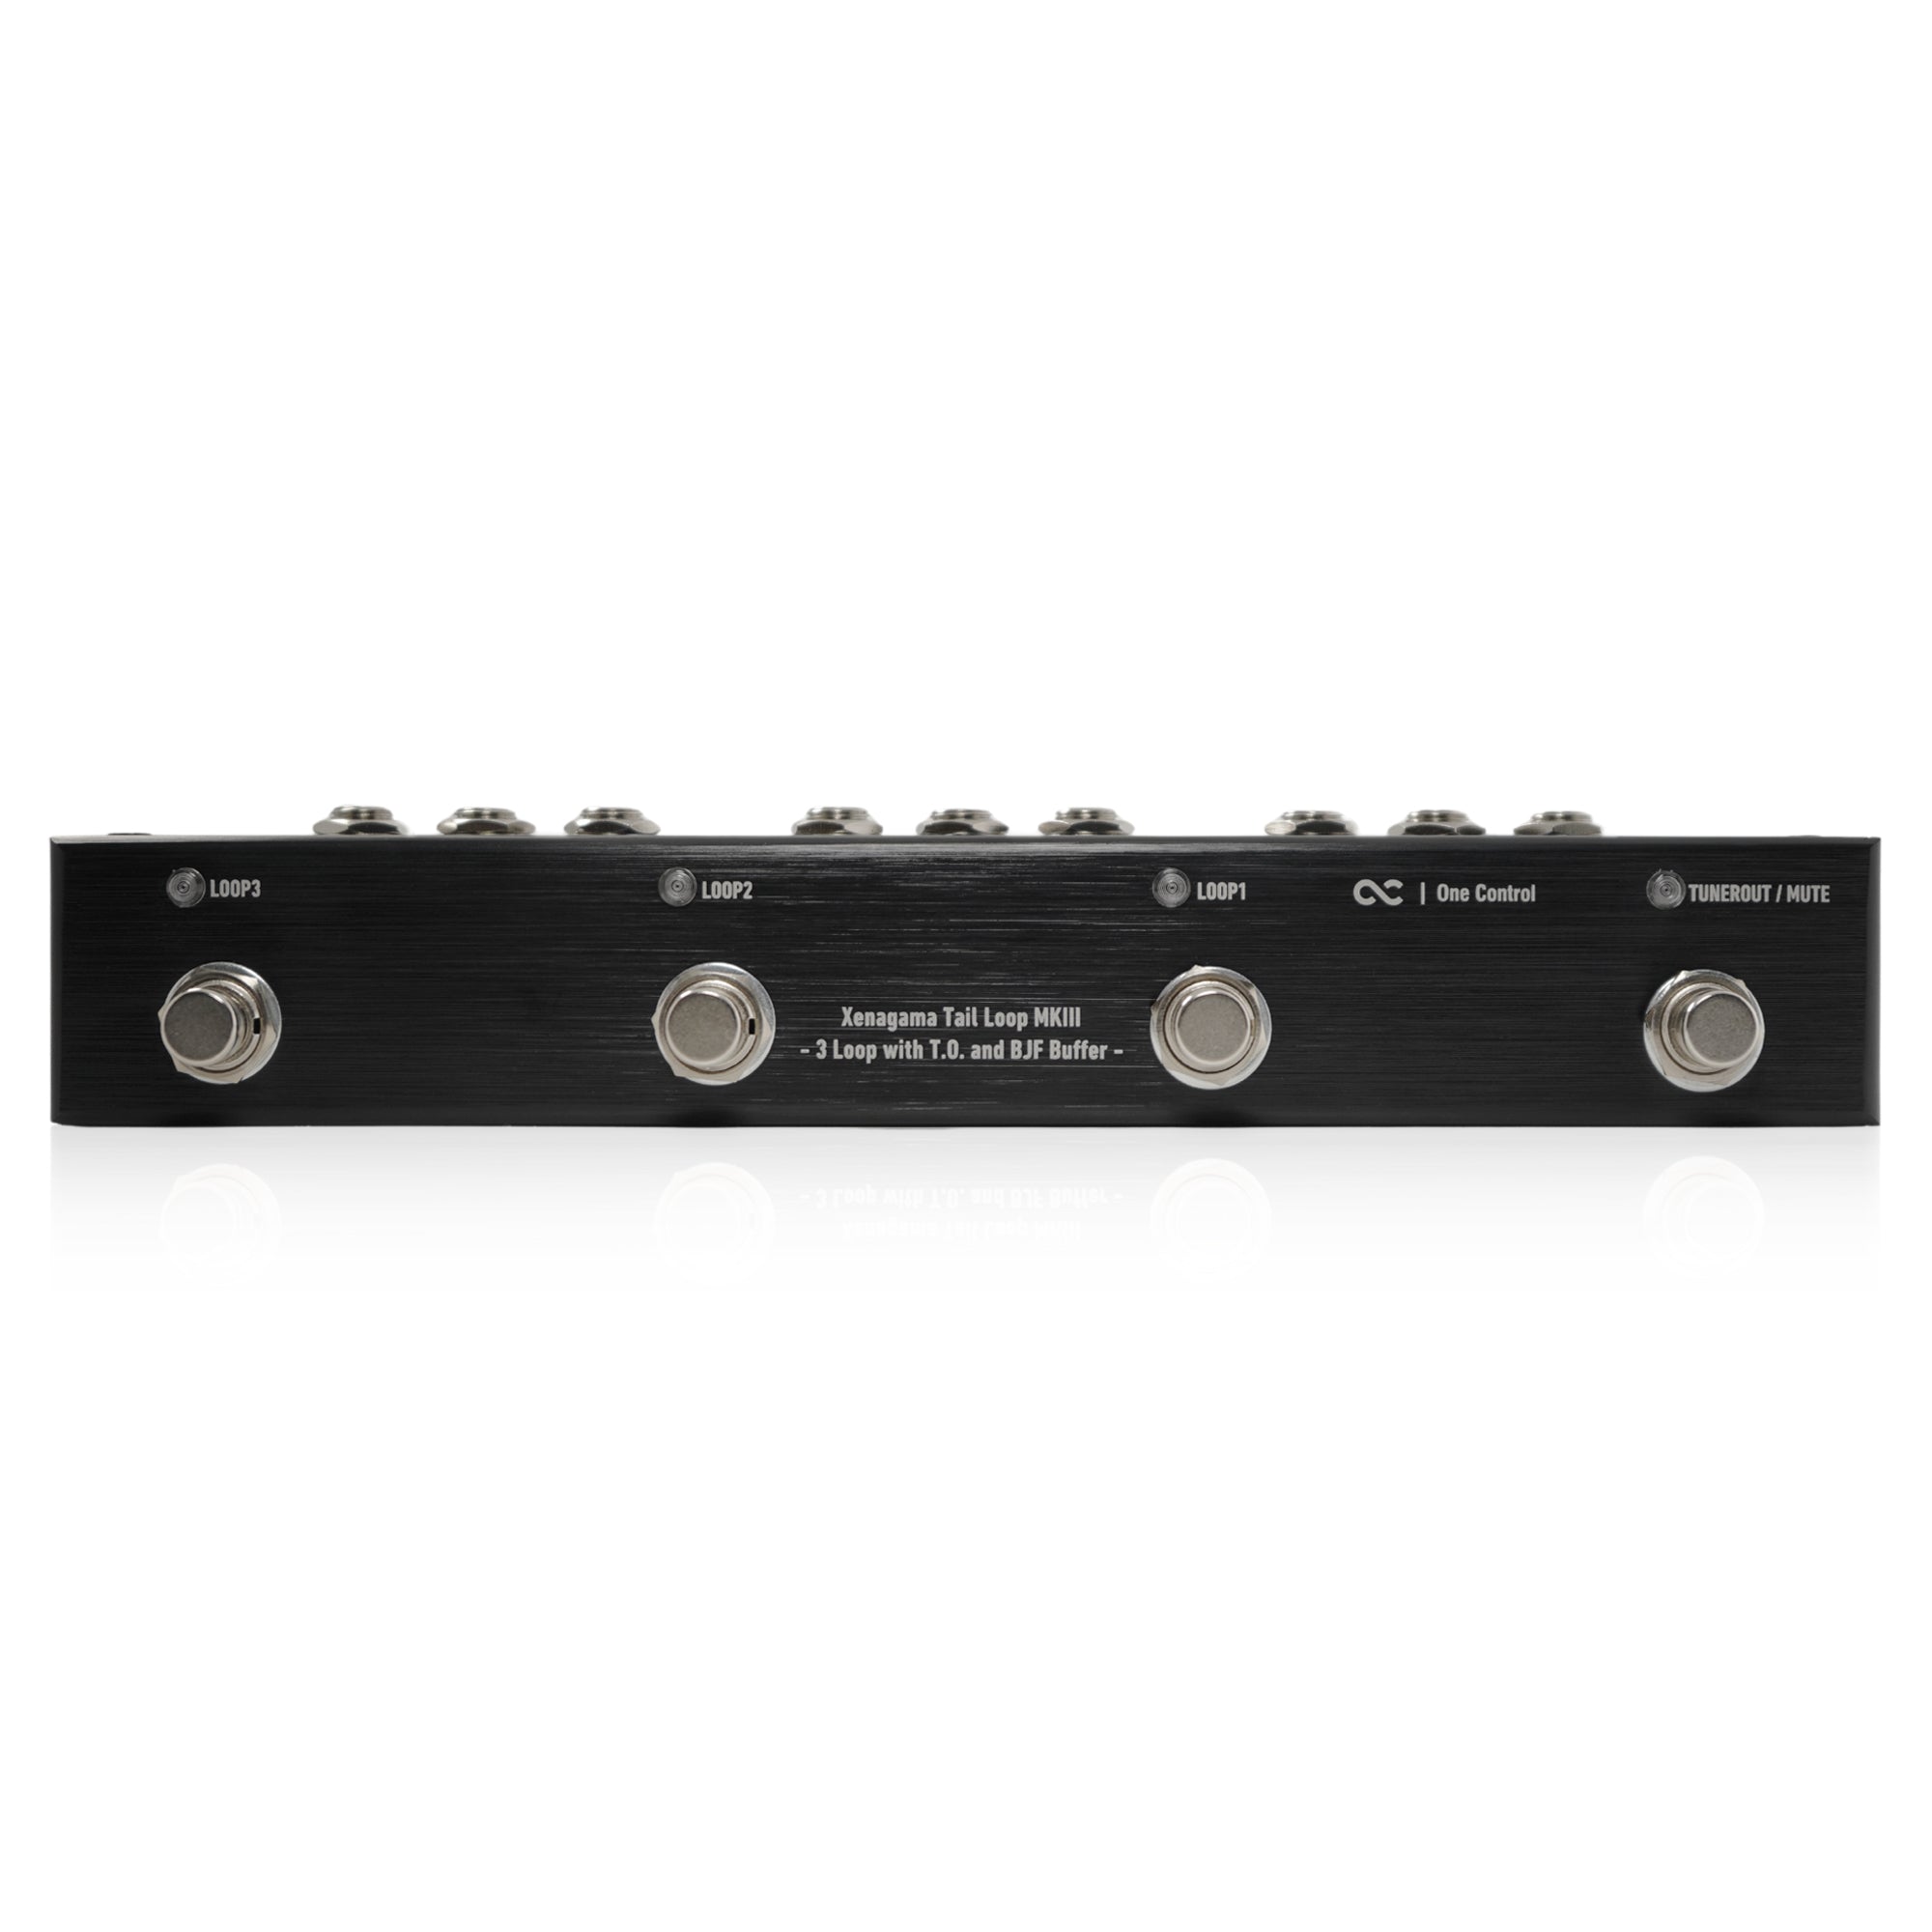 One Control Xenagama Tail MKIII 3-Loop Switcher with T.O and BJF Buffer